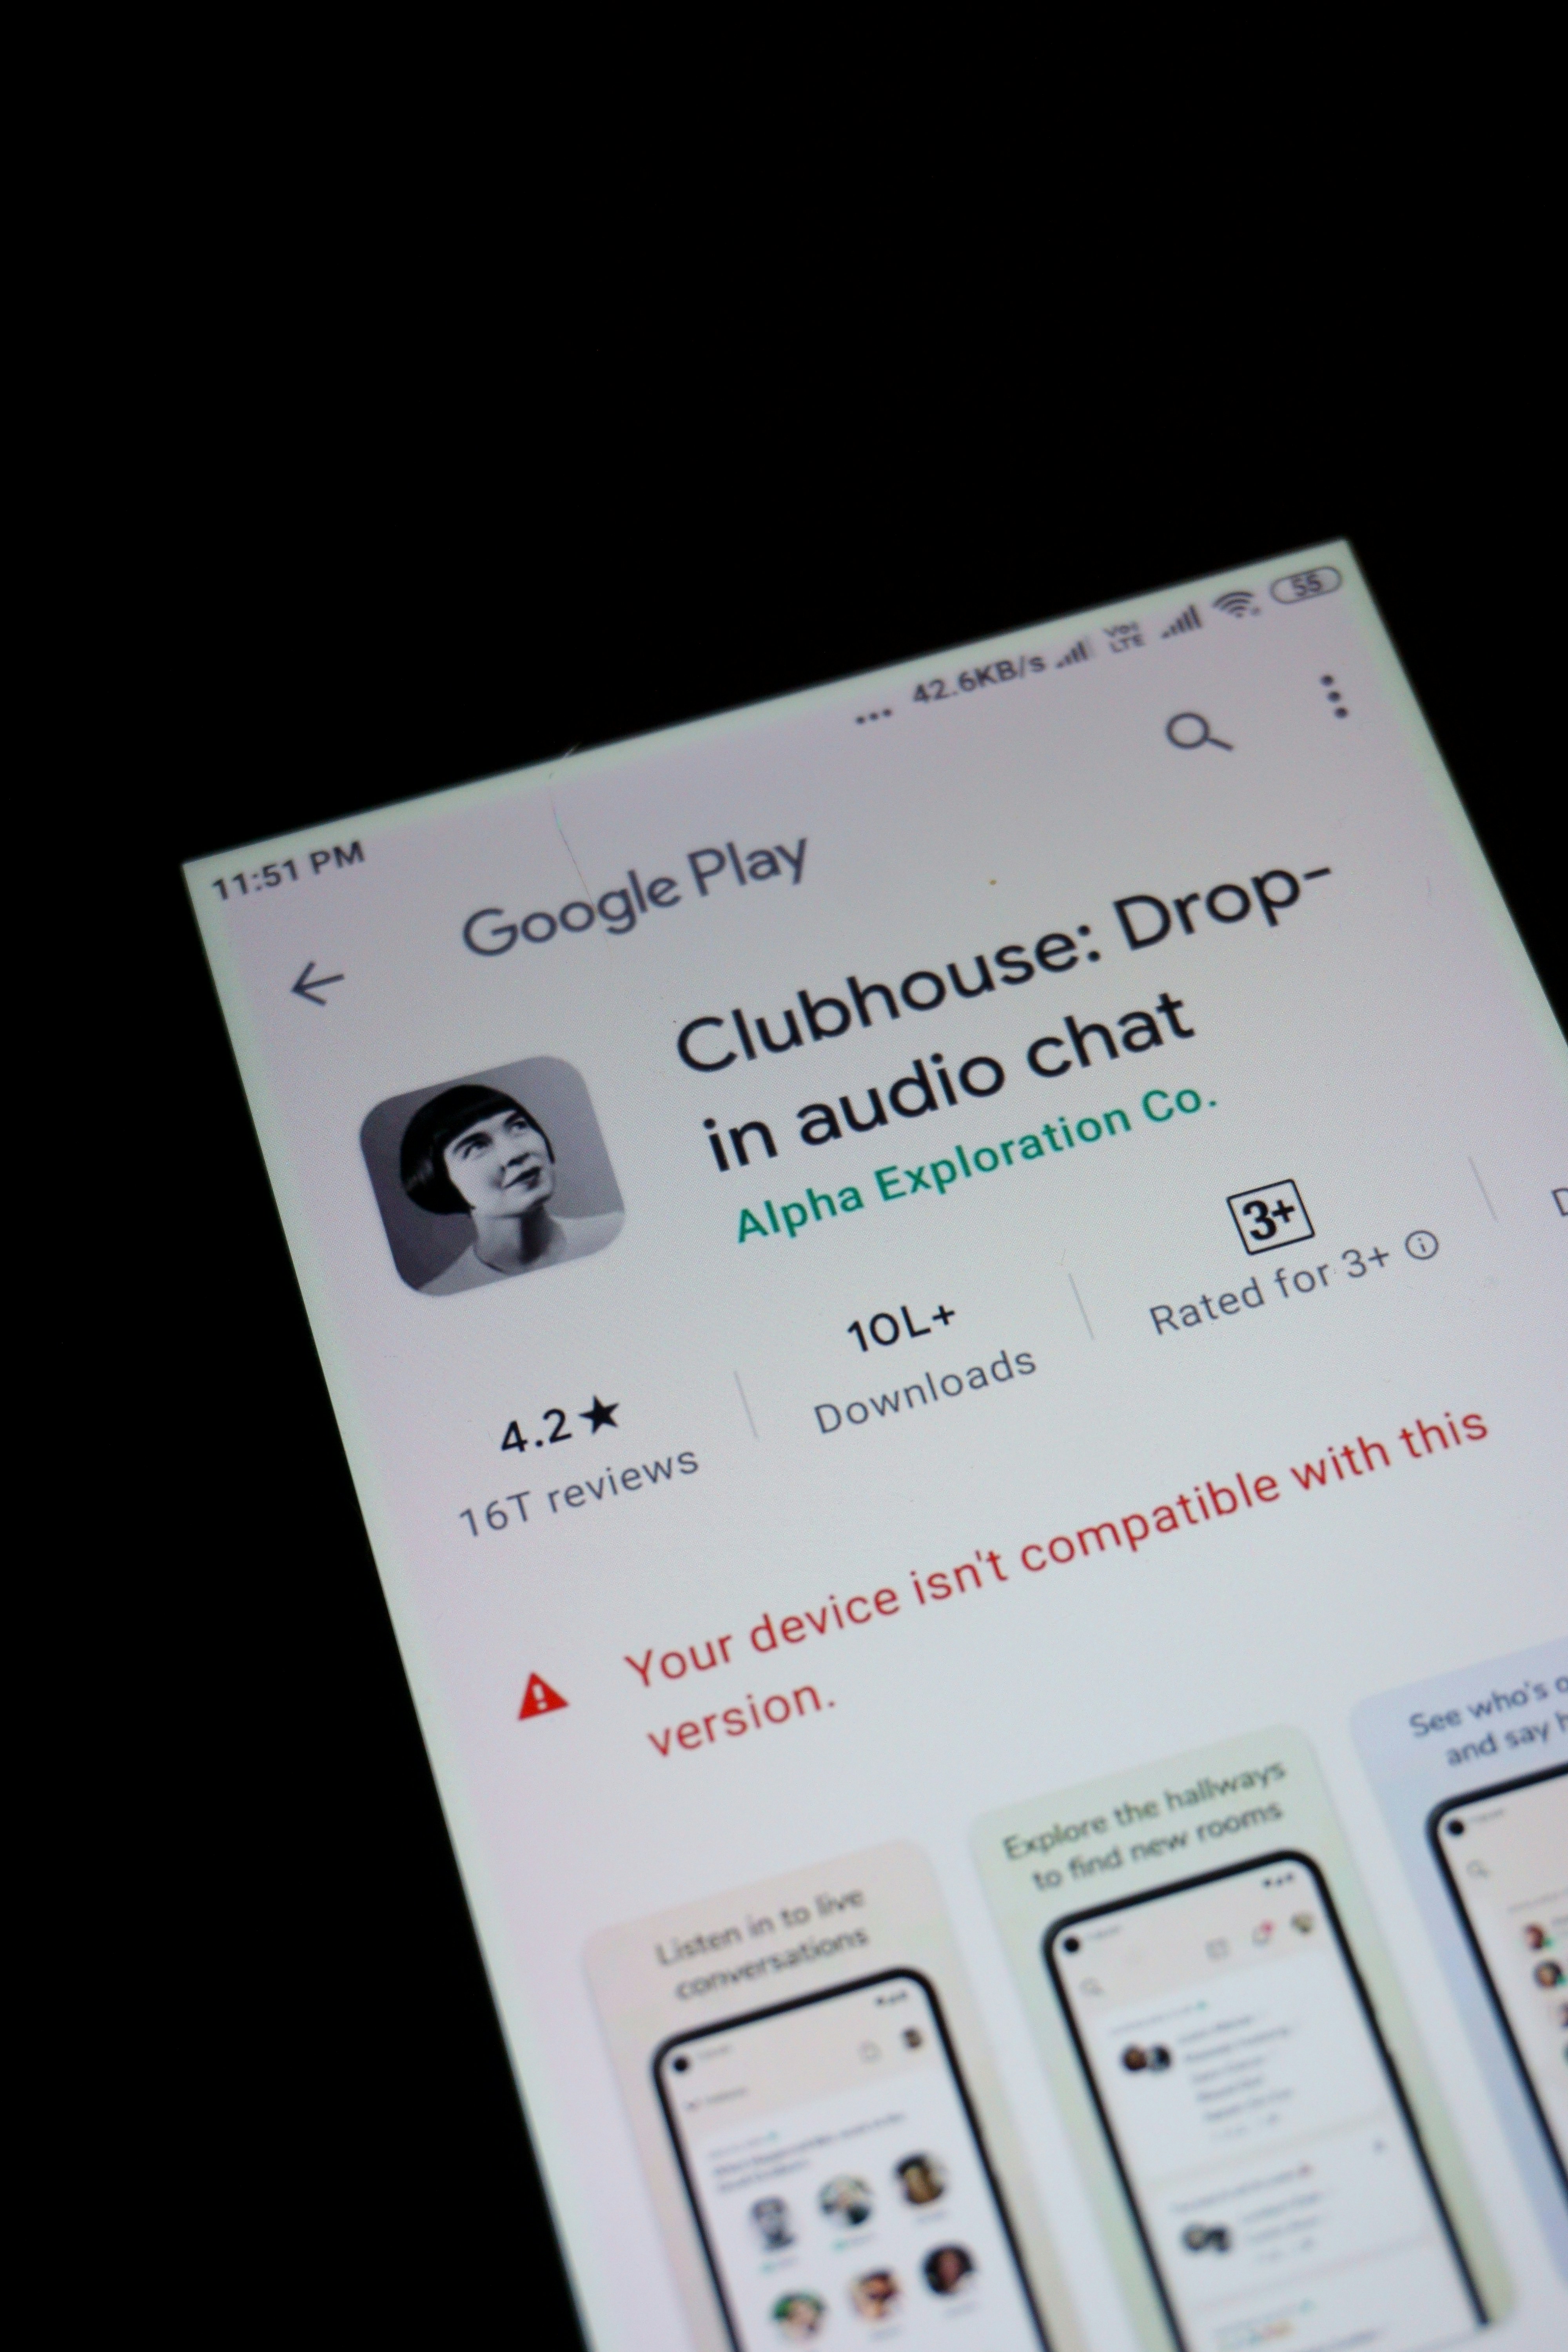 Clubhouse showing incompatible with Android version of a phone.